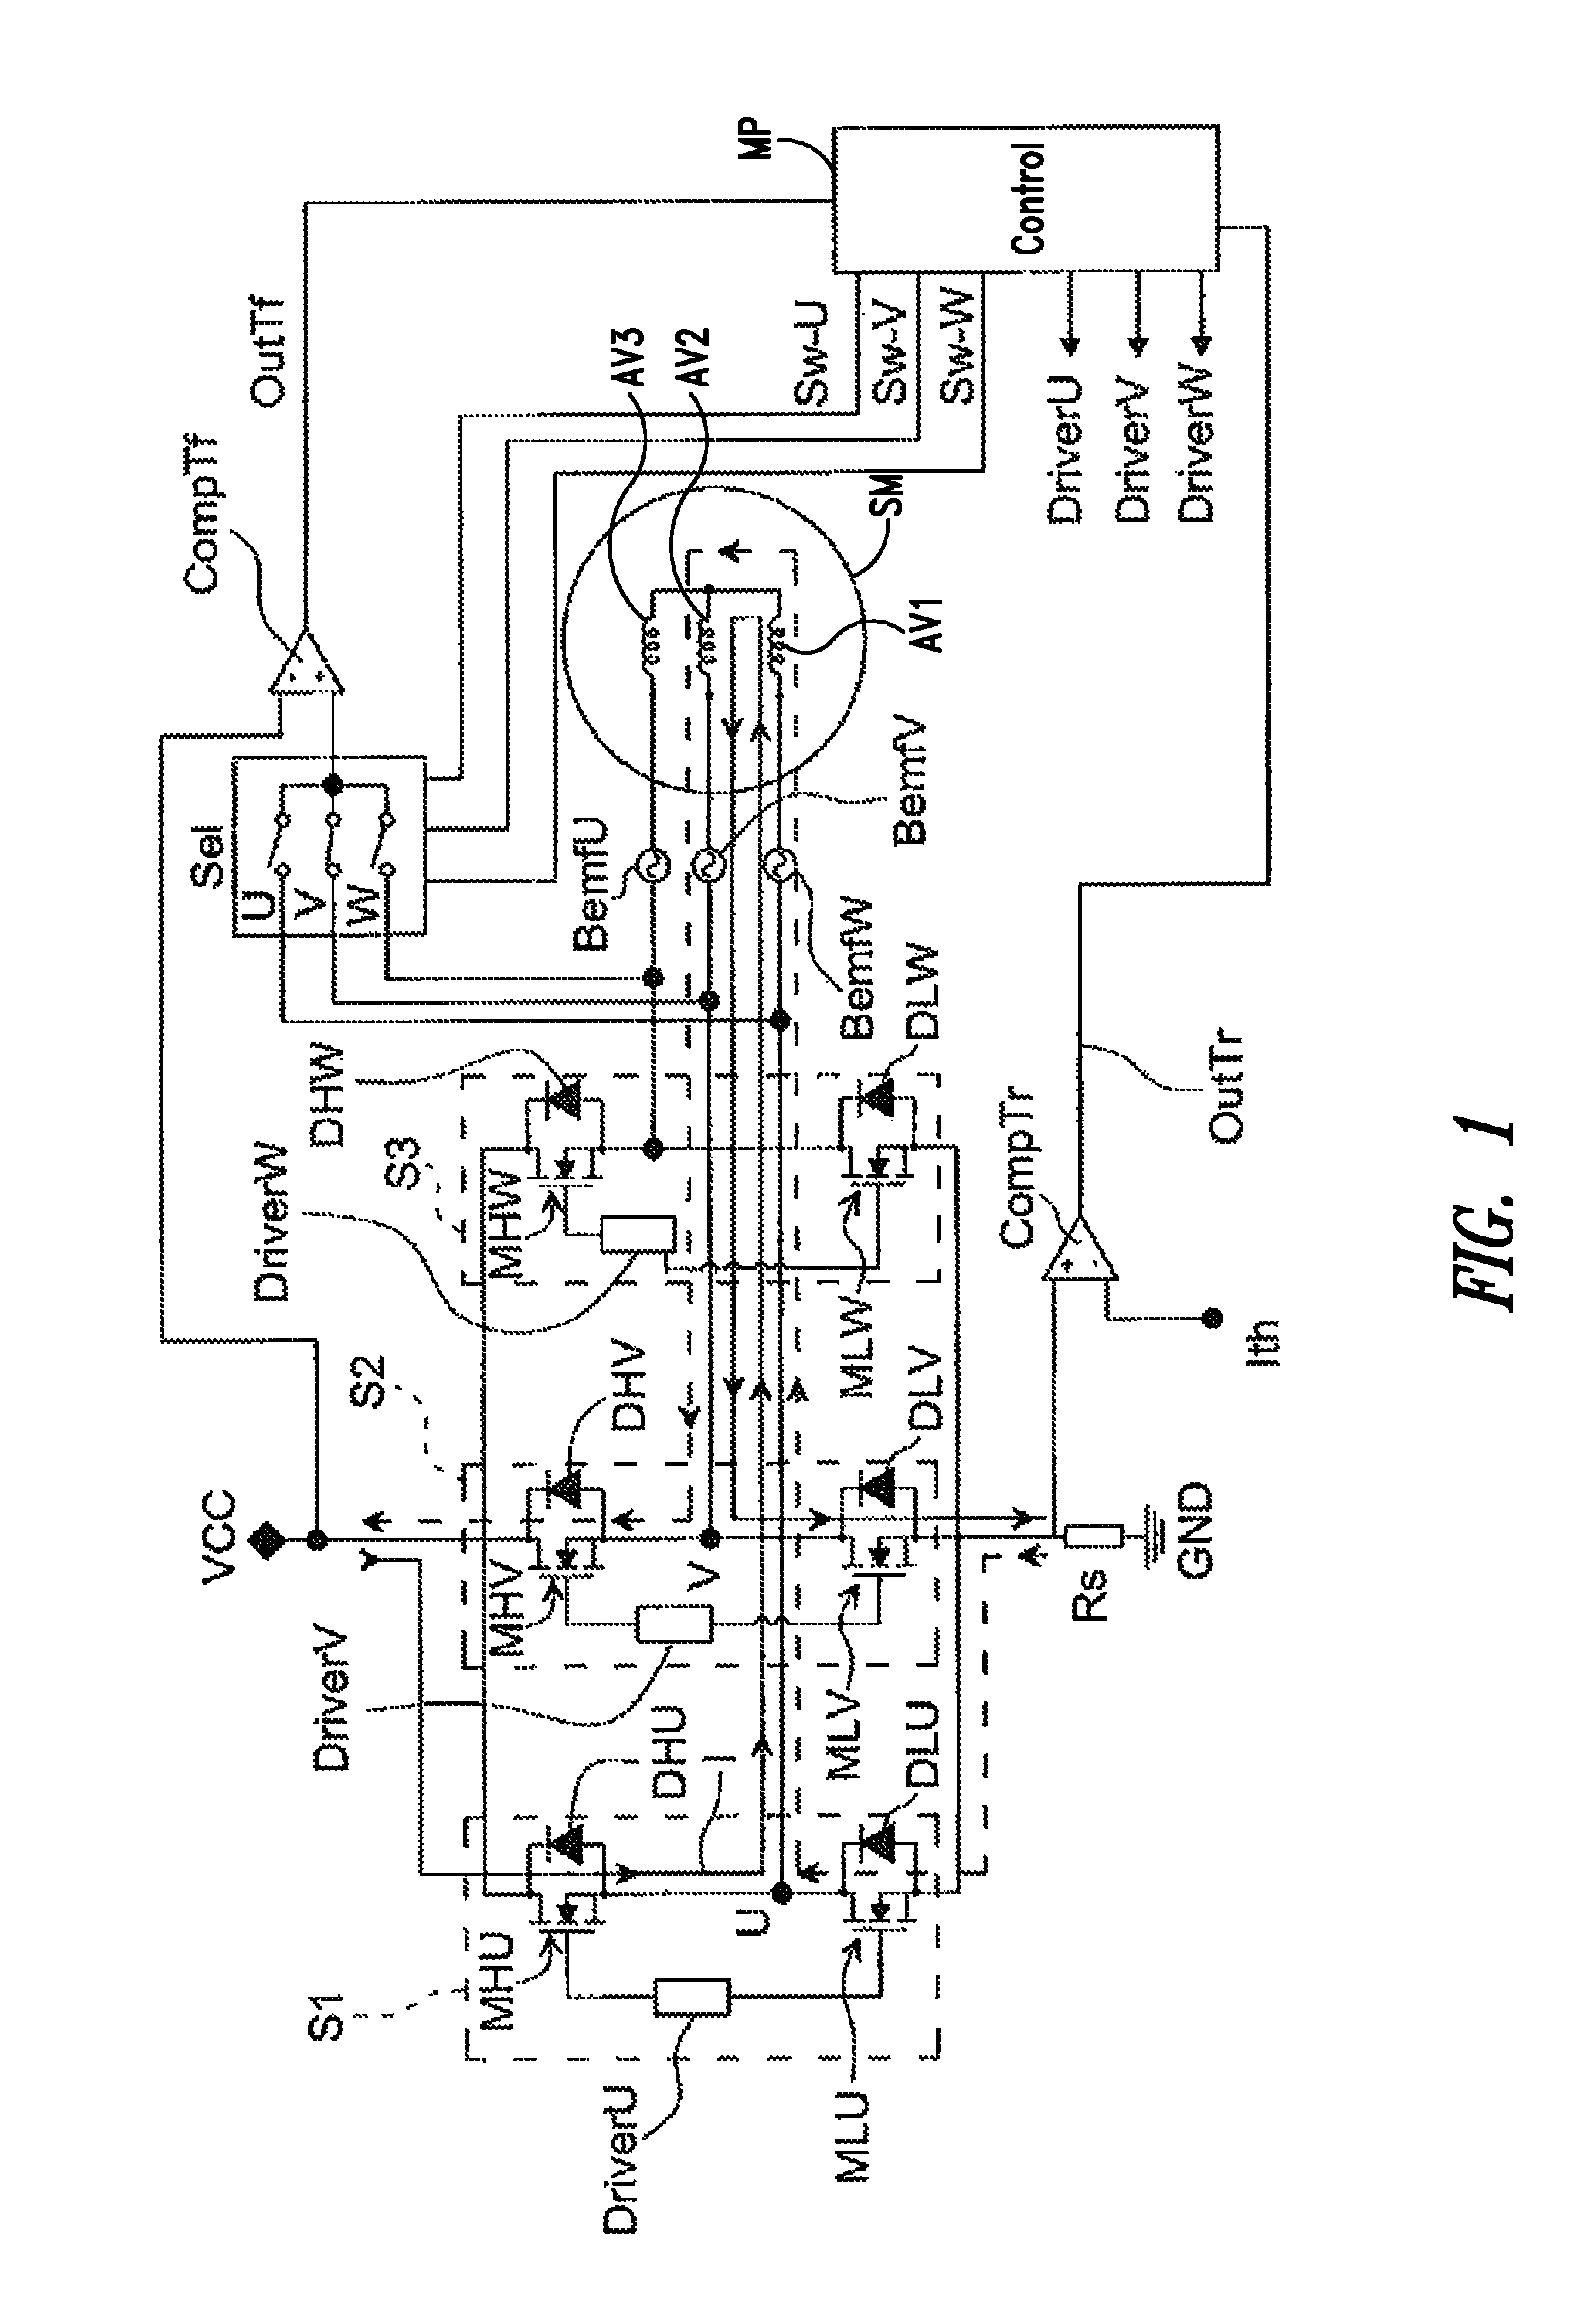 Apparatus for detecting the position of a rotor of an electric motor and related method